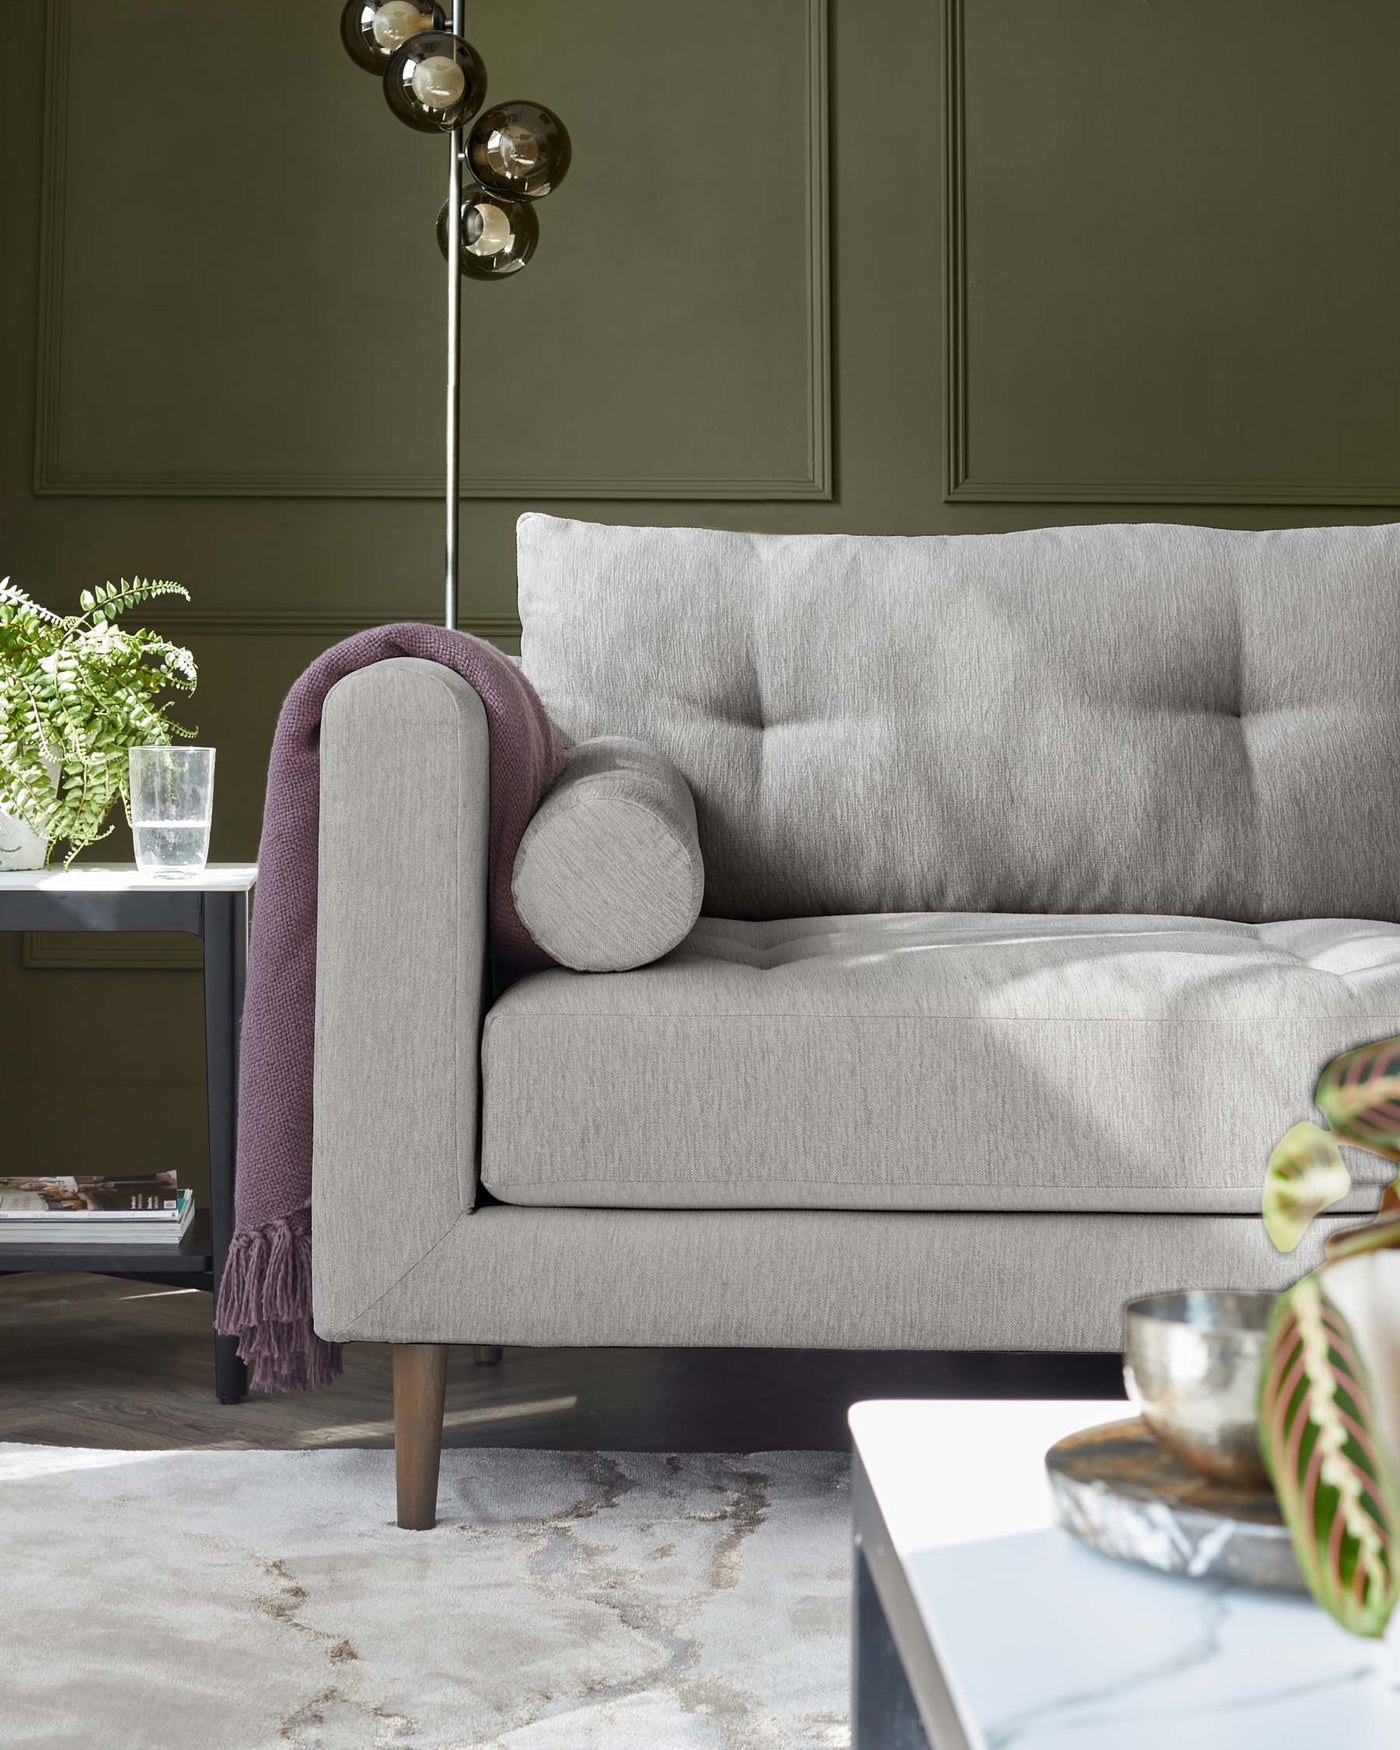 Modern grey upholstered sofa with wooden legs, two cushions, and a round bolster pillow, paired with a purple throw blanket over the armrest. A minimalist glass side table with metallic bowls and greenery is partially visible in the foreground, all set against a muted green wall and atop a textured grey area rug.